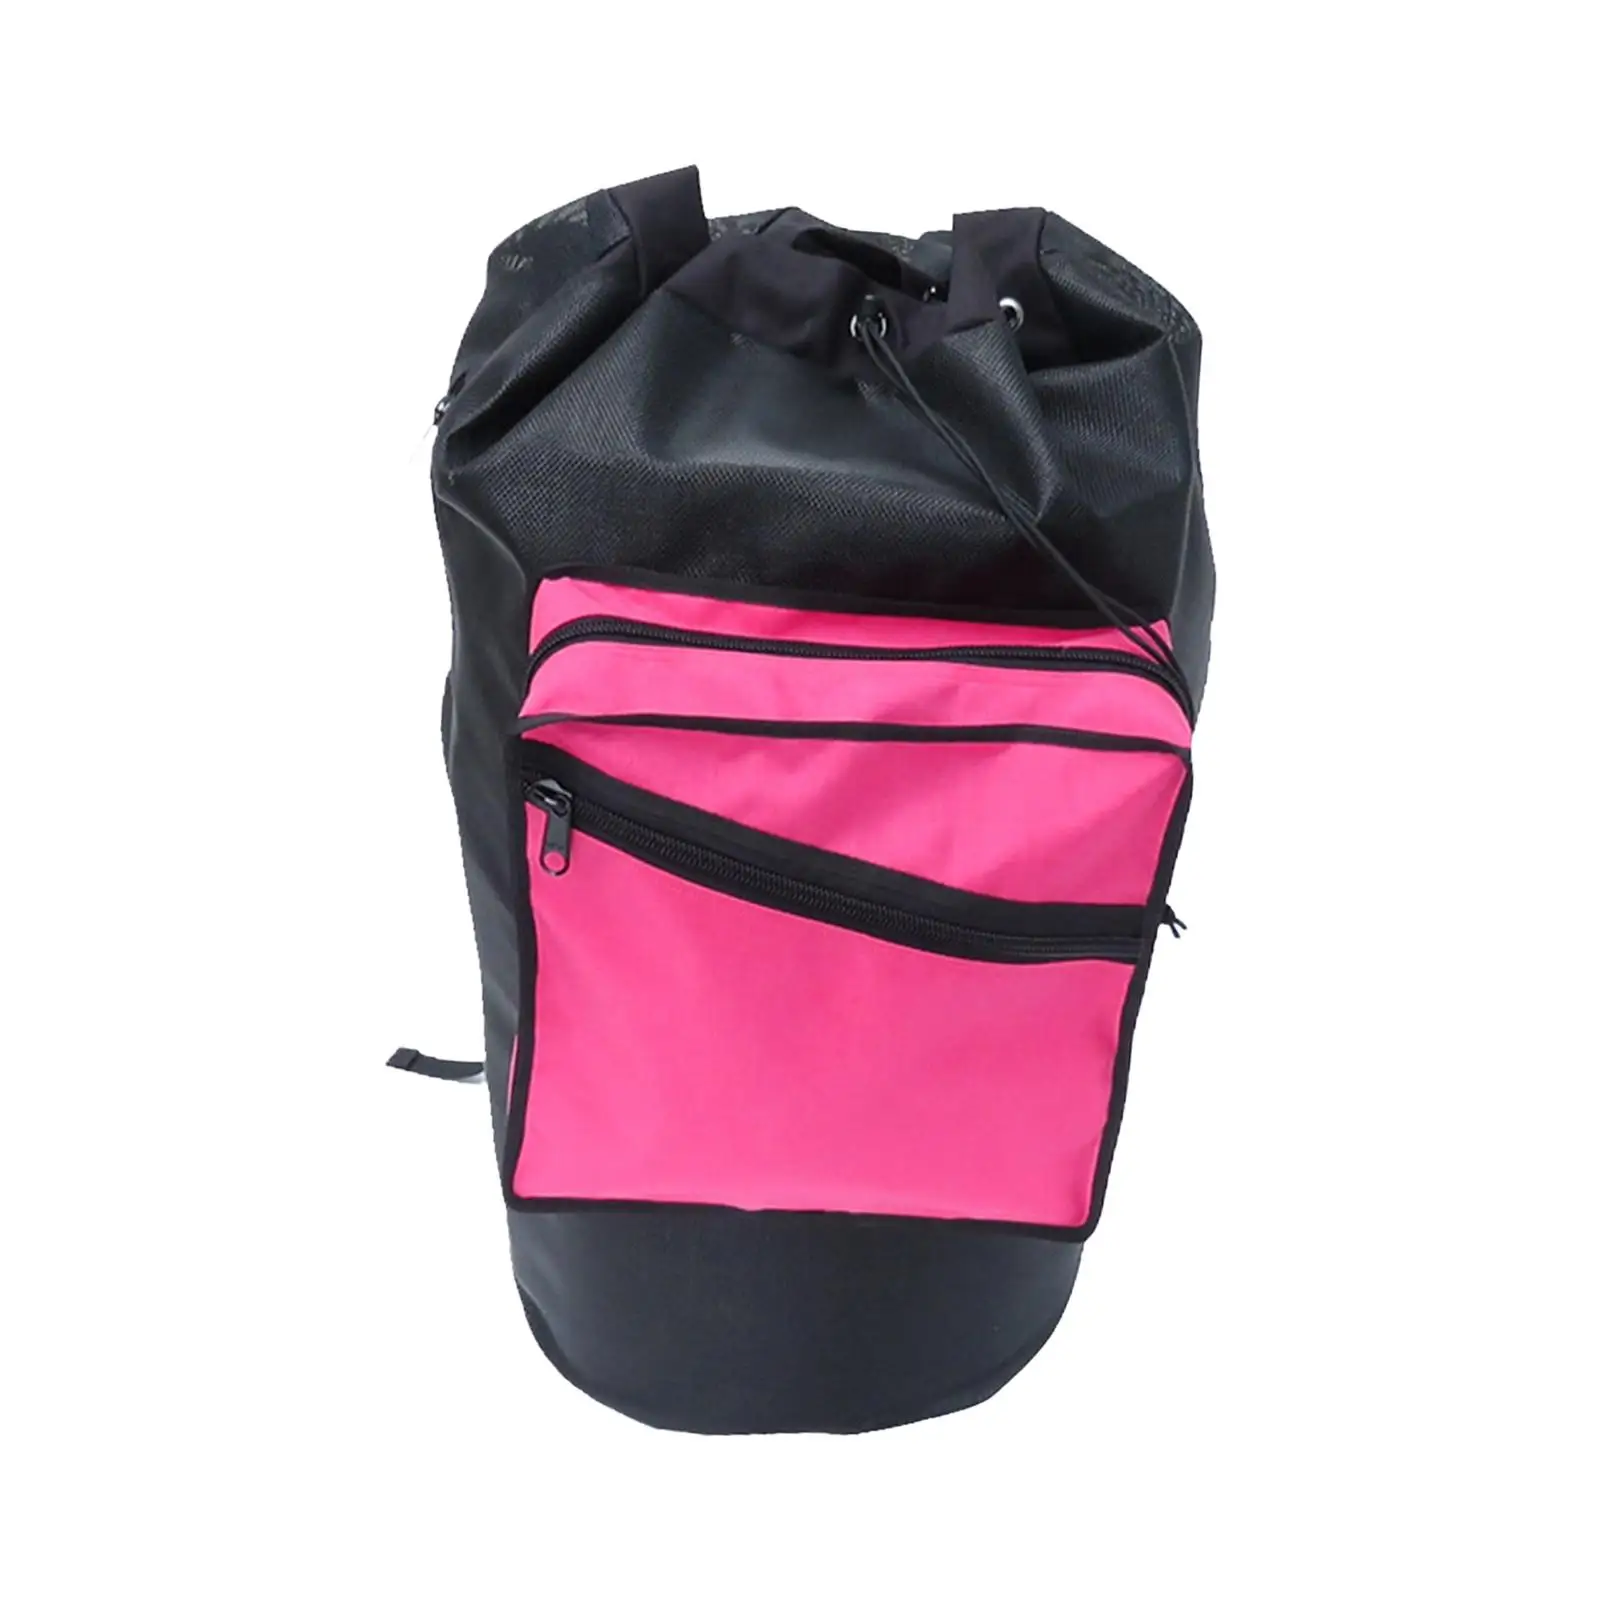 Scuba Diving Bag Heavy Duty Holds Mask, Fins, Snorkel, and More Diving Dry Bag for Snorkeling Gear Scuba Diving Water Sport Gear